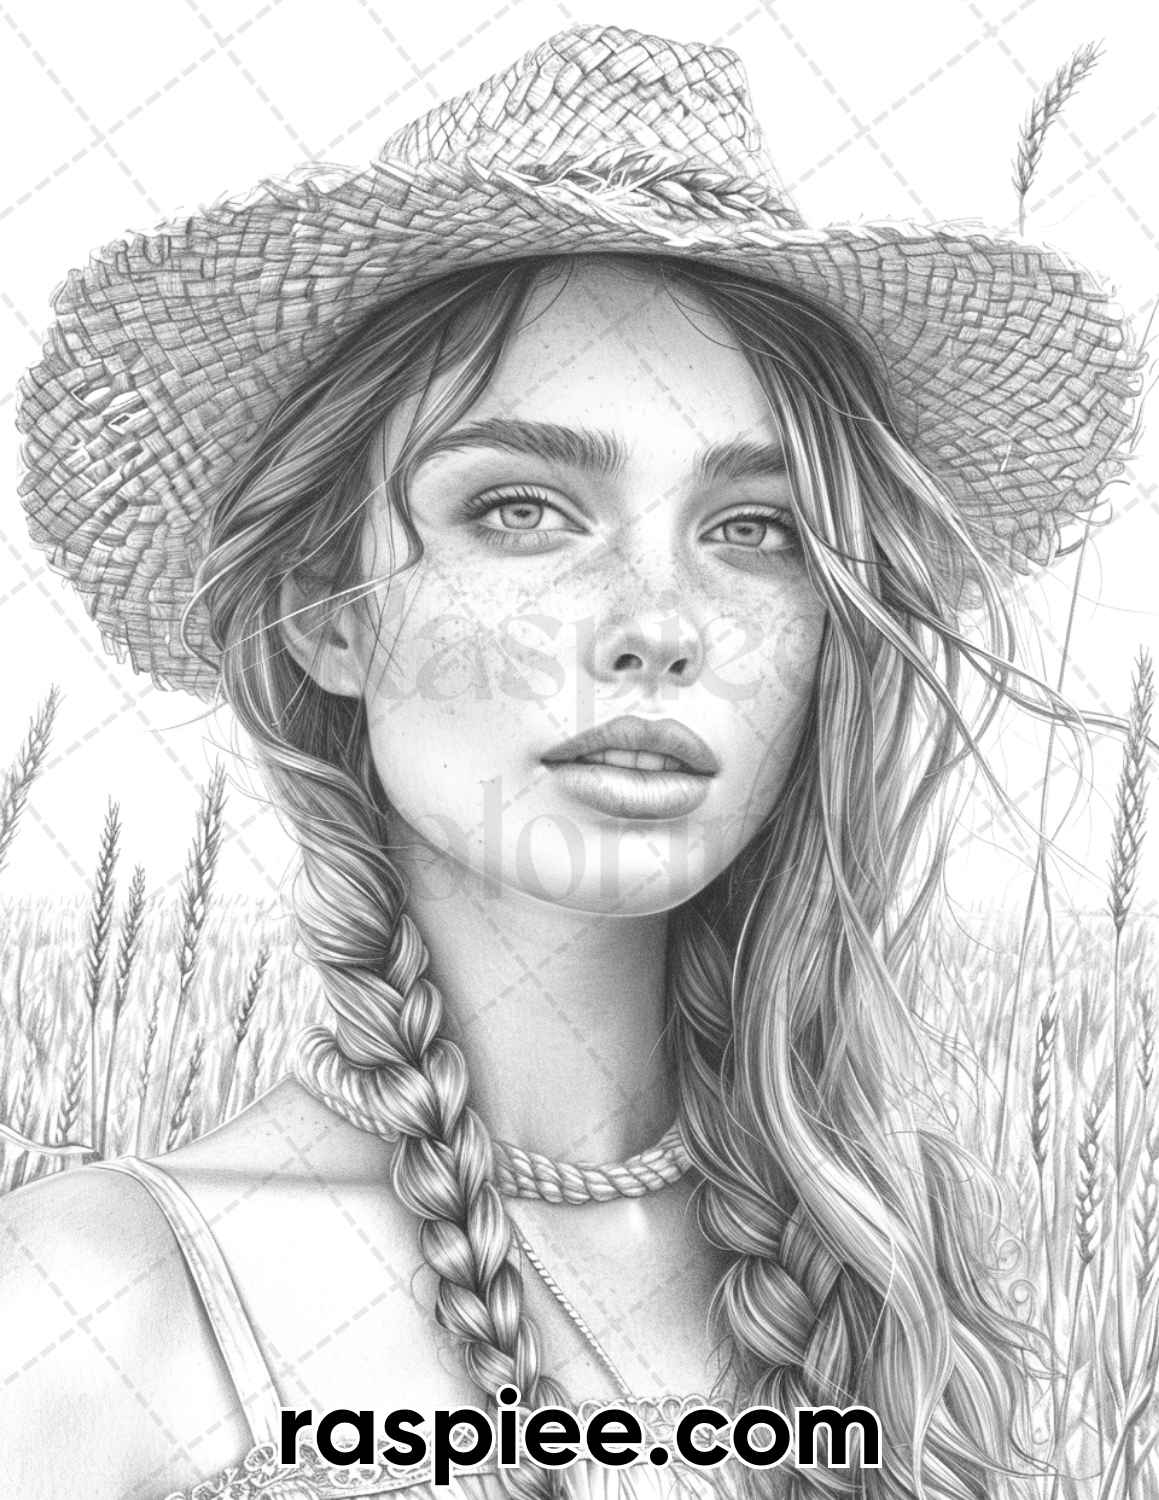 adult coloring pages, adult coloring sheets, adult coloring book pdf, adult coloring book printable, grayscale coloring pages, grayscale coloring books, portrait coloring pages for adults, portrait coloring book, grayscale illustration, vintage country girls coloring pages